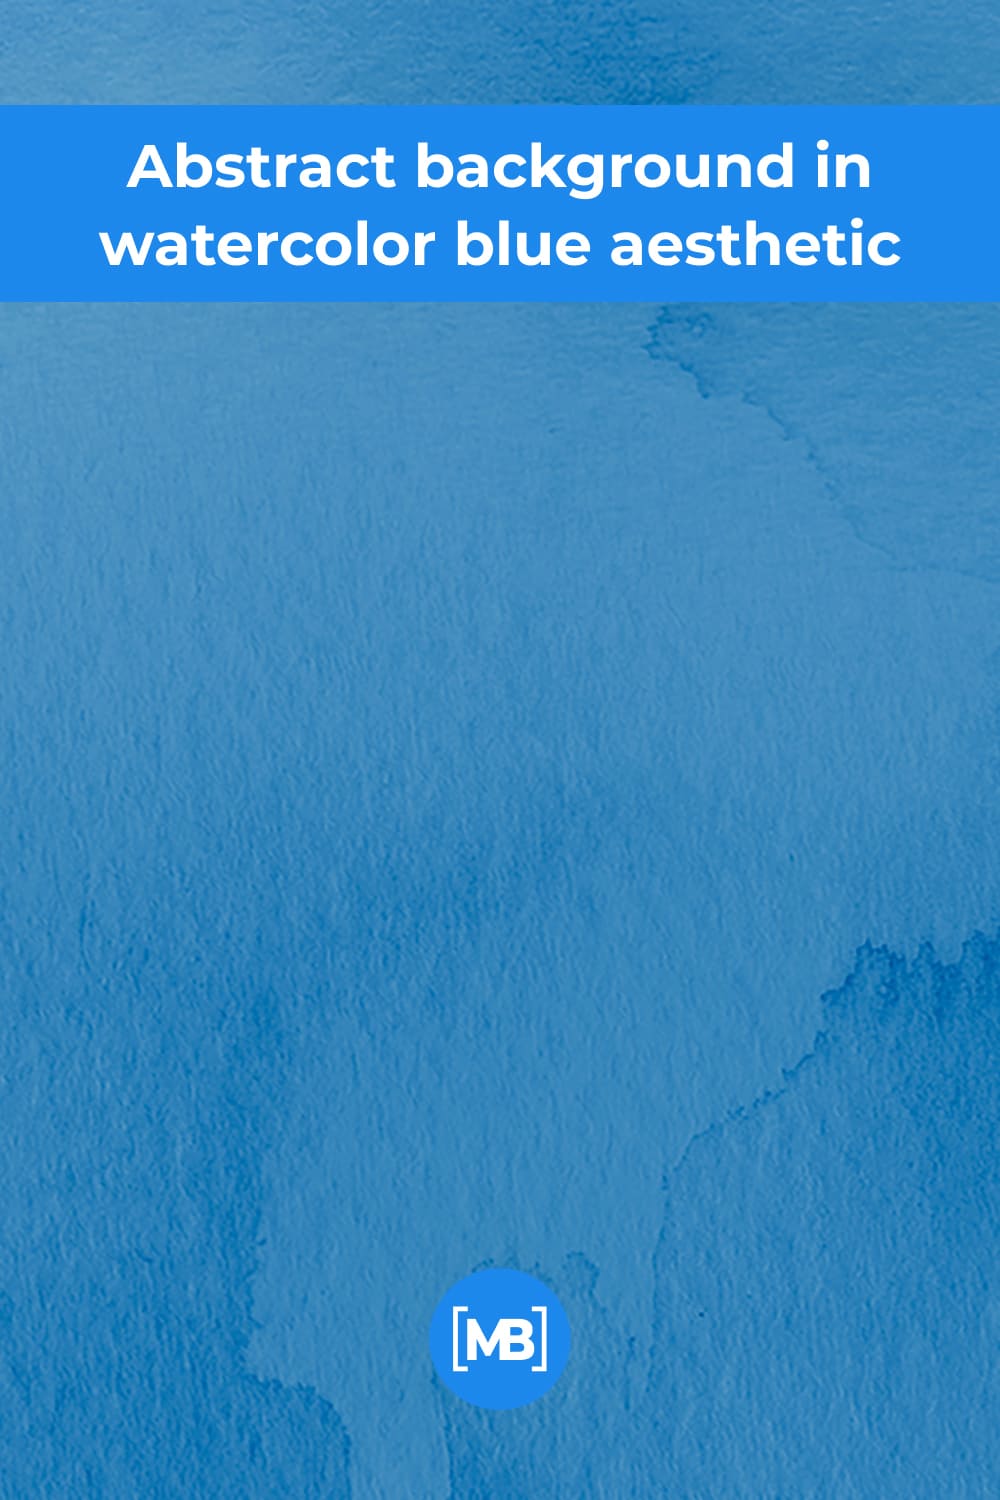 Abstract background in watercolor blue aesthetic.